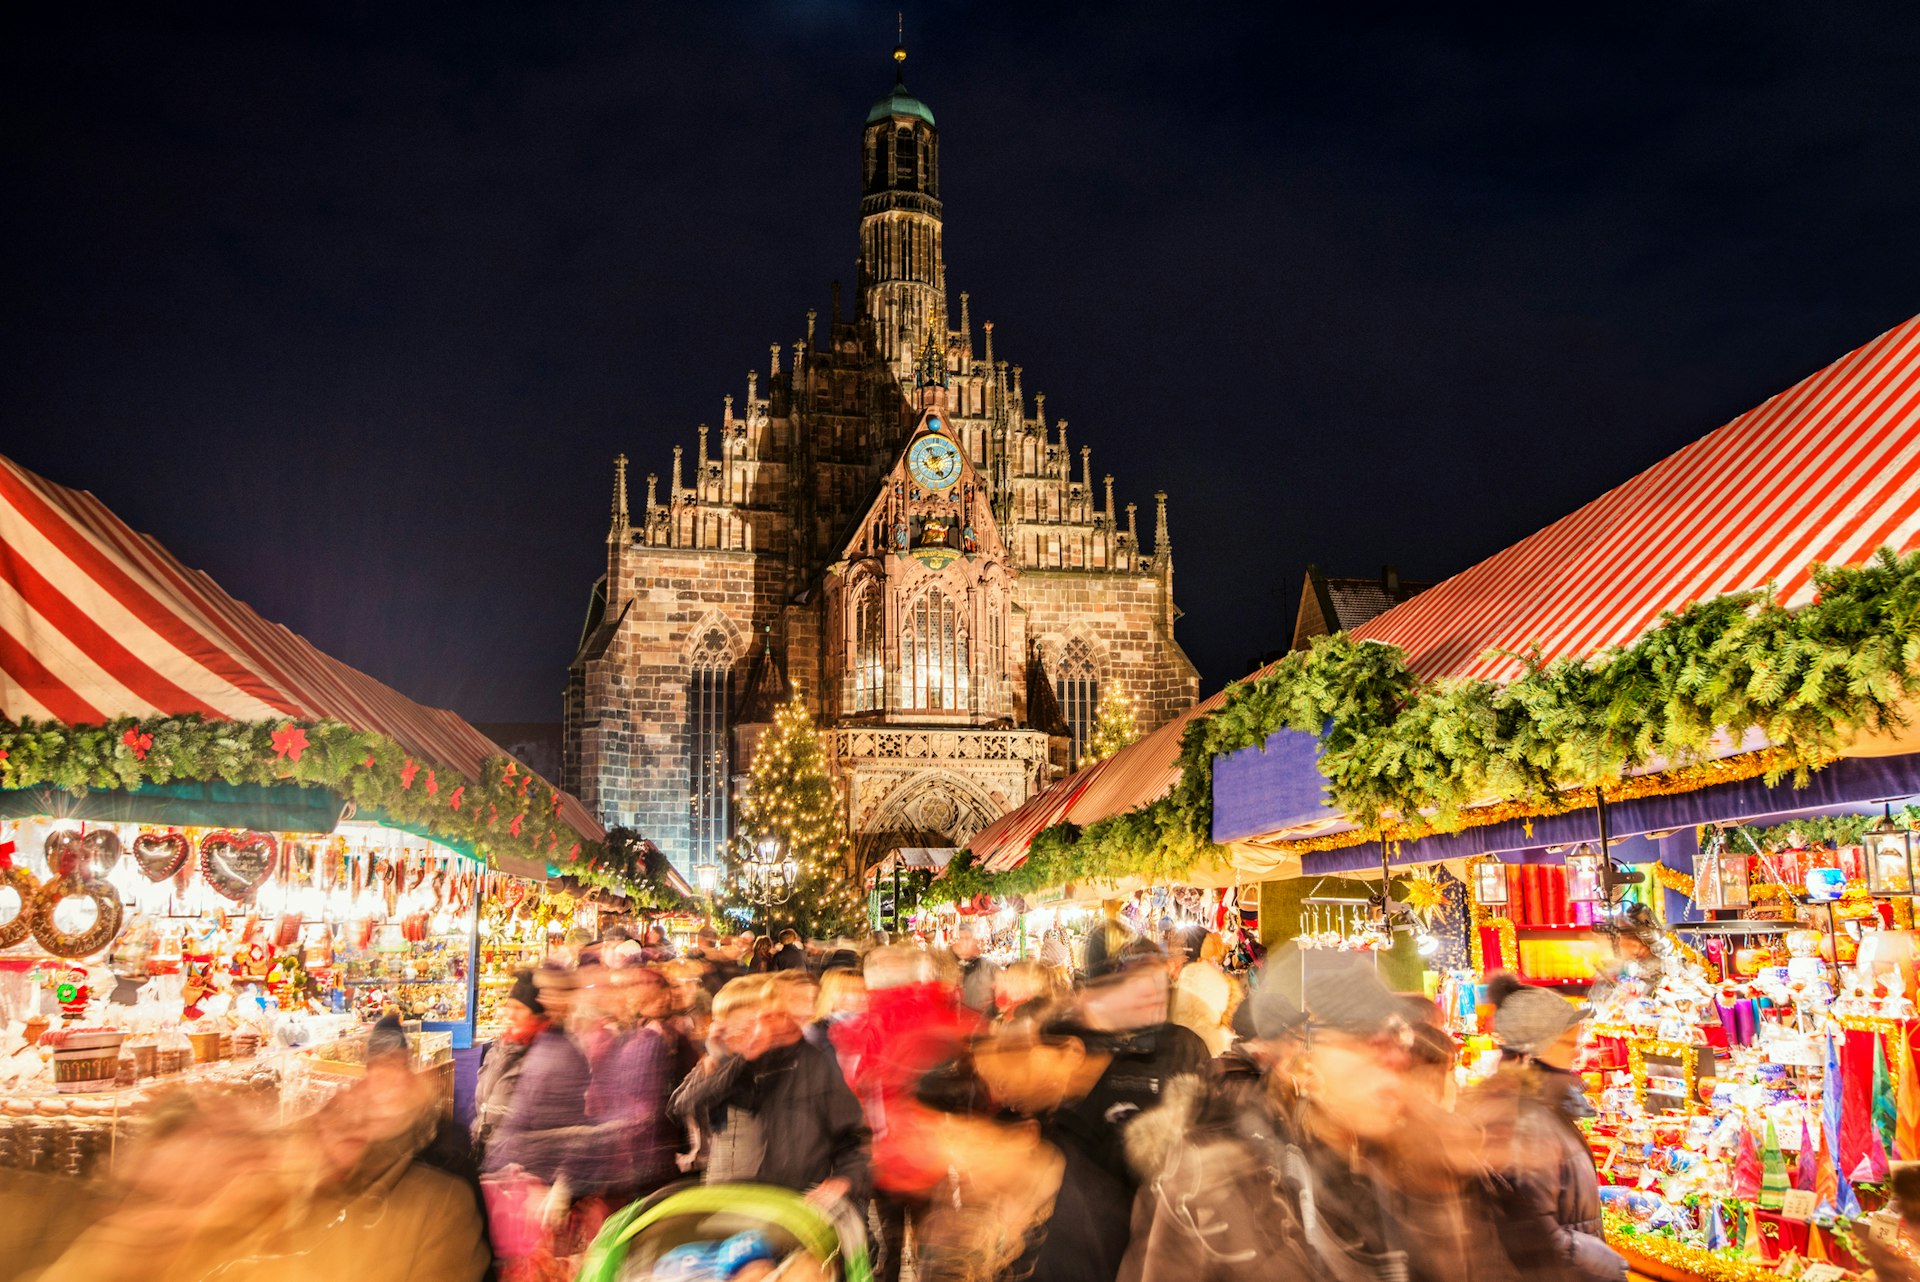 A huge crowd of people moving over Nuremberg's world-famous Christmas market (Nuremberg Christkindlesmarkt) at night, passing colorful illuminated Christmas decorations and food stalls.